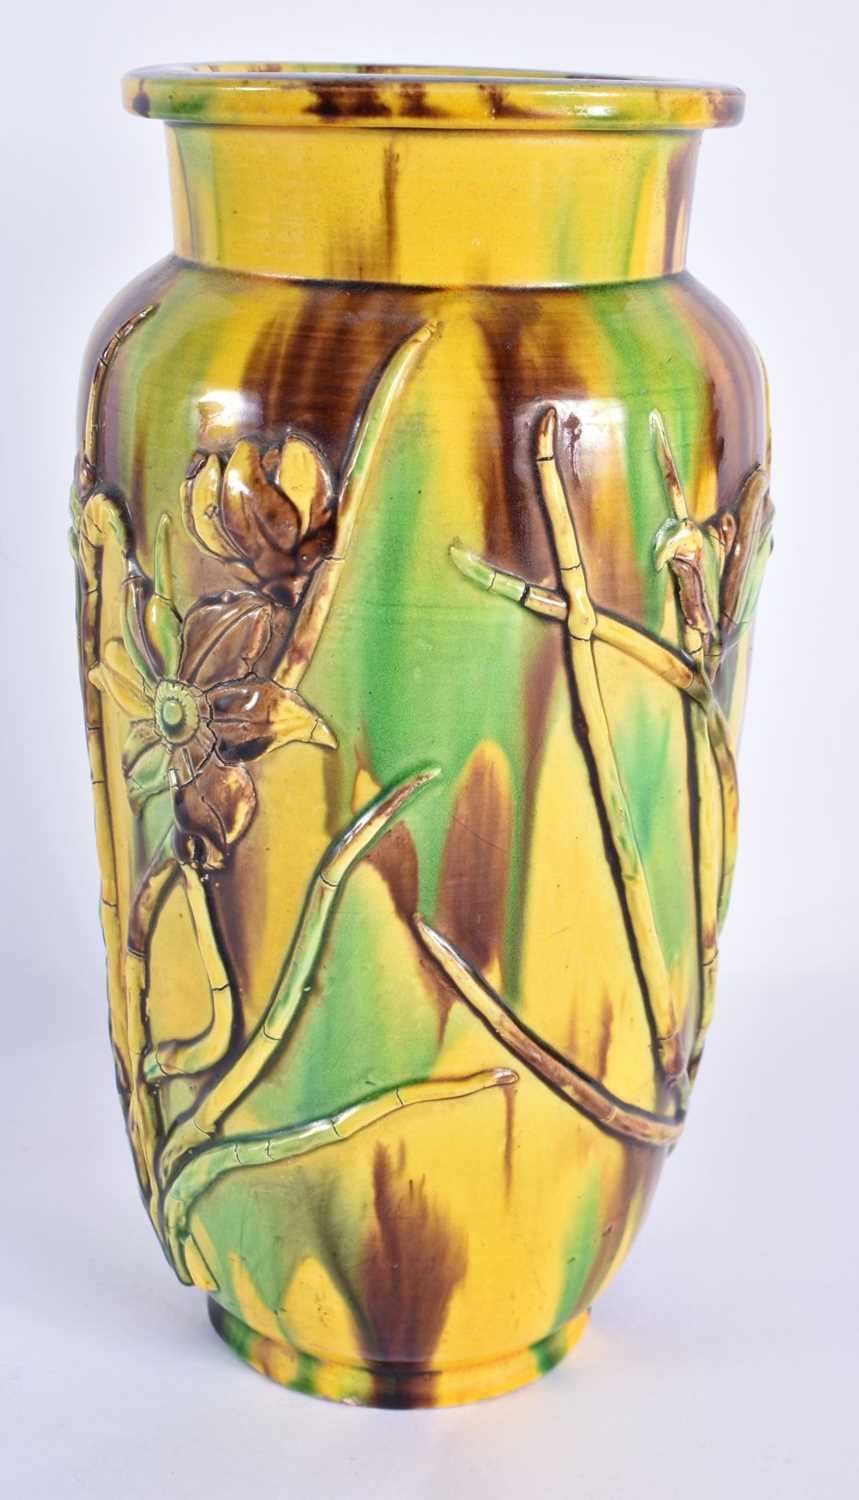 A RARE ANTIQUE SPINACH AND EGG GLAZED ENGLISH POTTERY VASE Attributed to Christopher Dresser for - Image 3 of 5